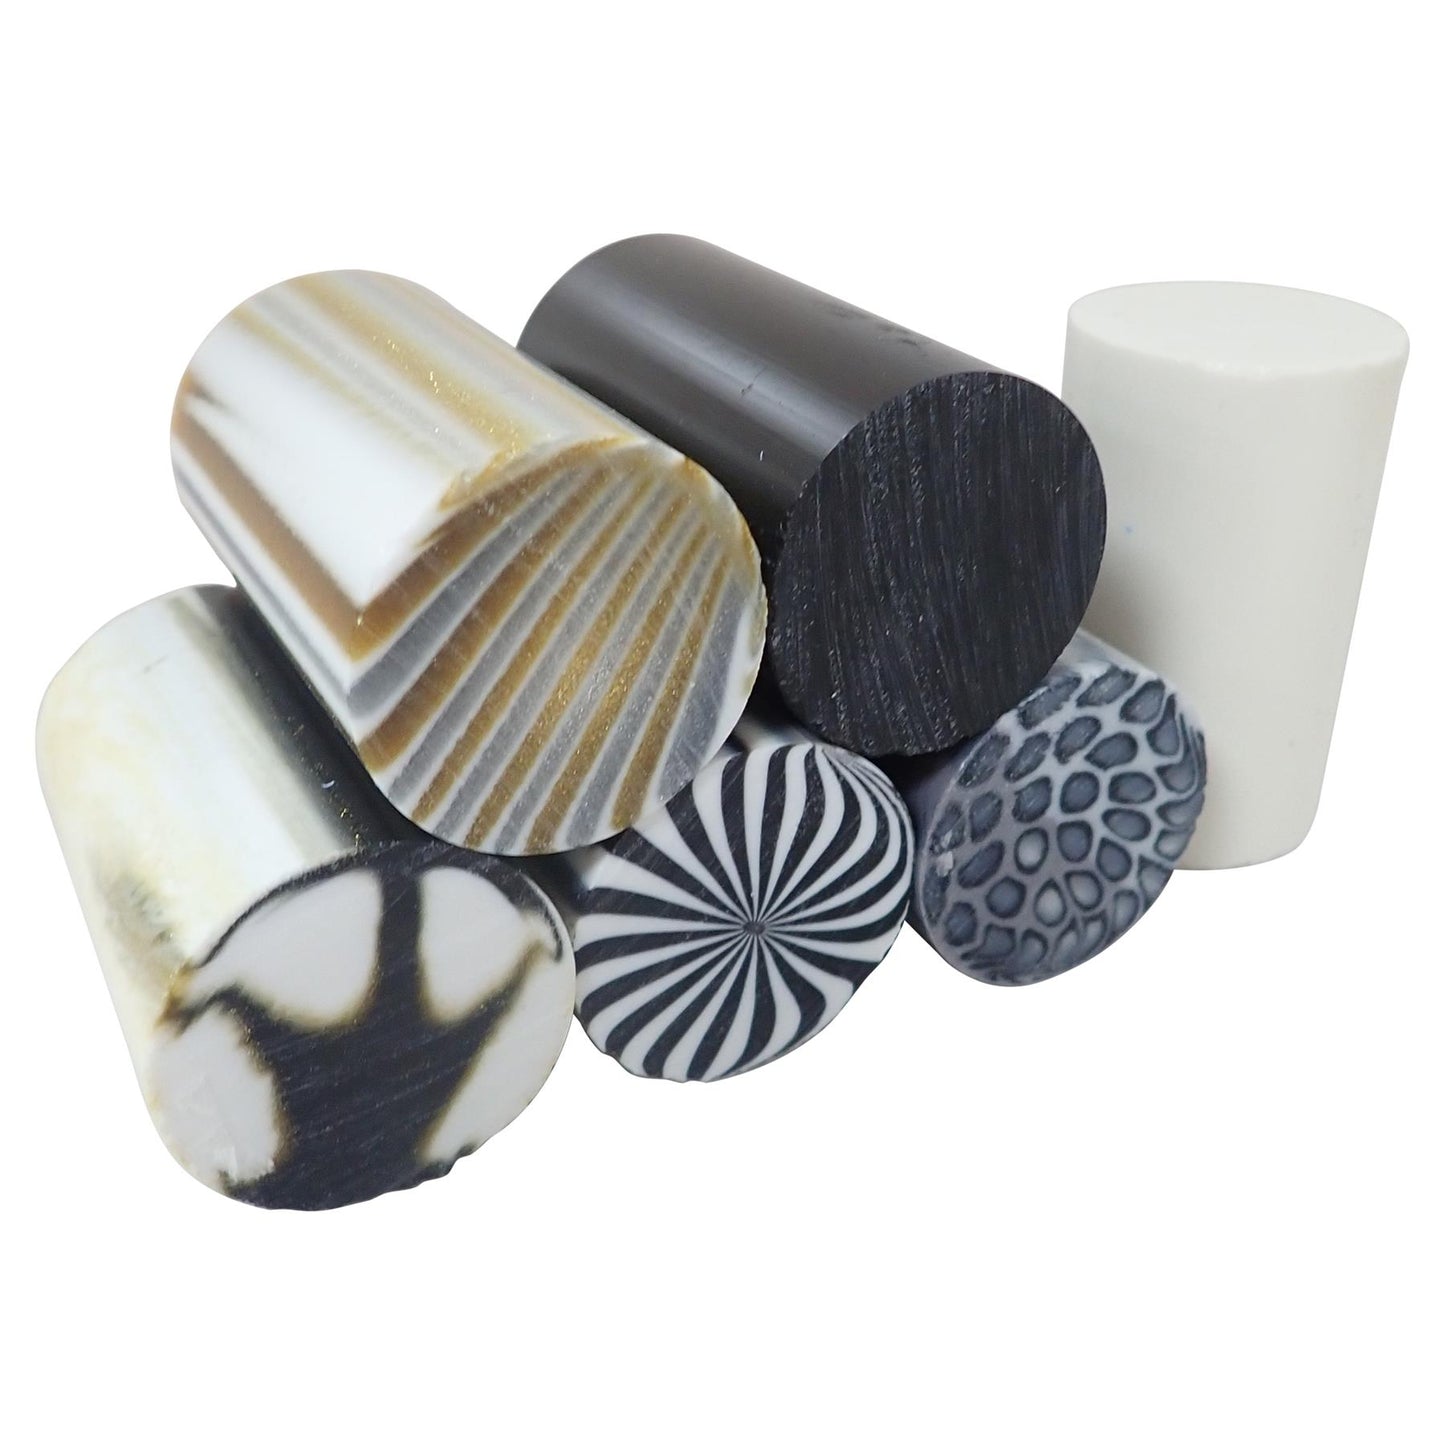 [Turners' Mill] Black / White Mixed Polyester Turning Blanks - 63.5x39x39mm, Set of 6